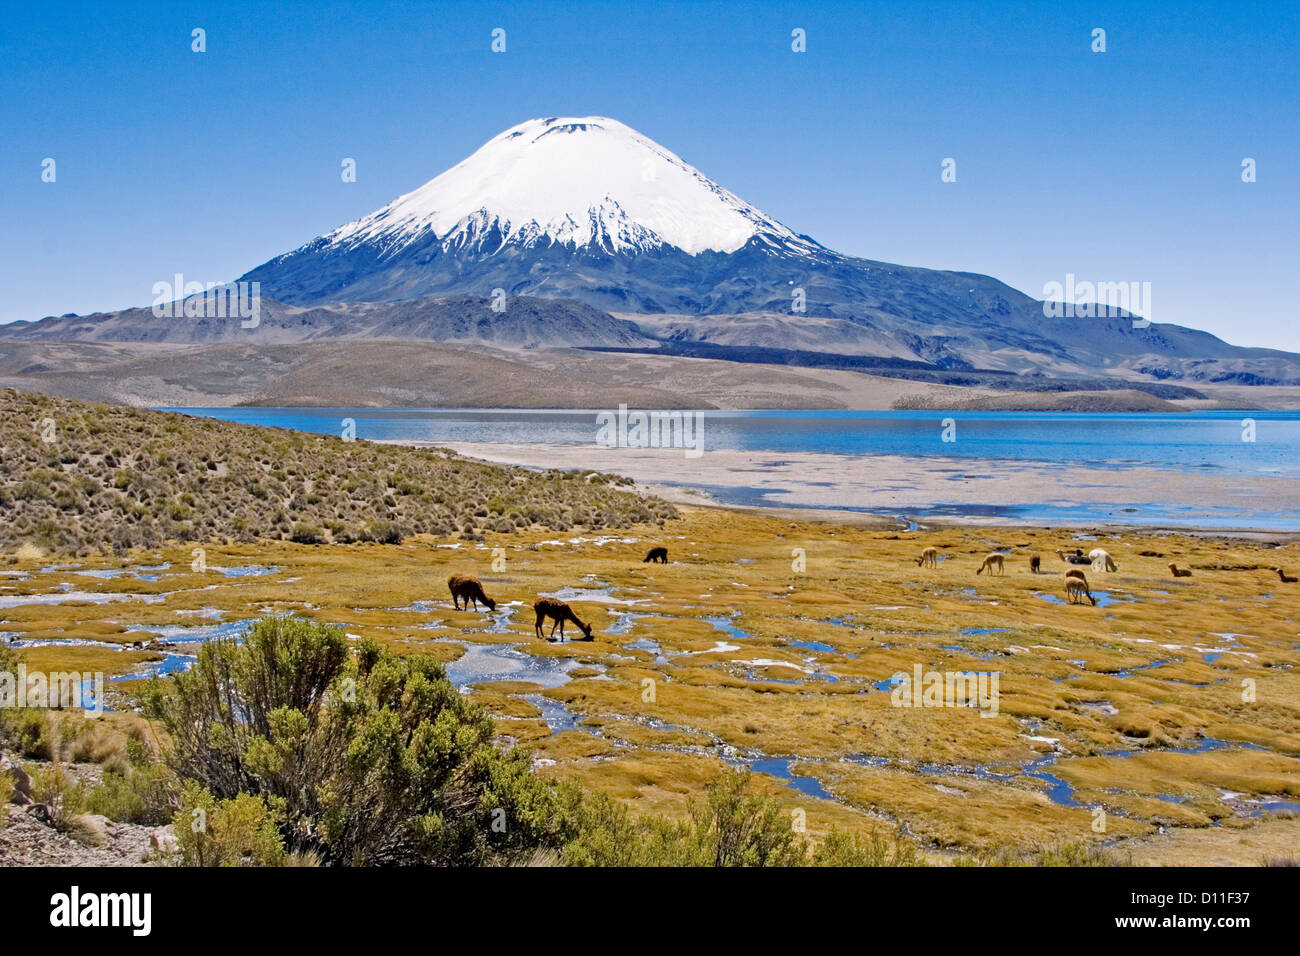 Picturesque landscape with alpacas grazing beside blue waters of Lake Chungara at foot of snow-capped volcano Parinacota, Chile Stock Photo